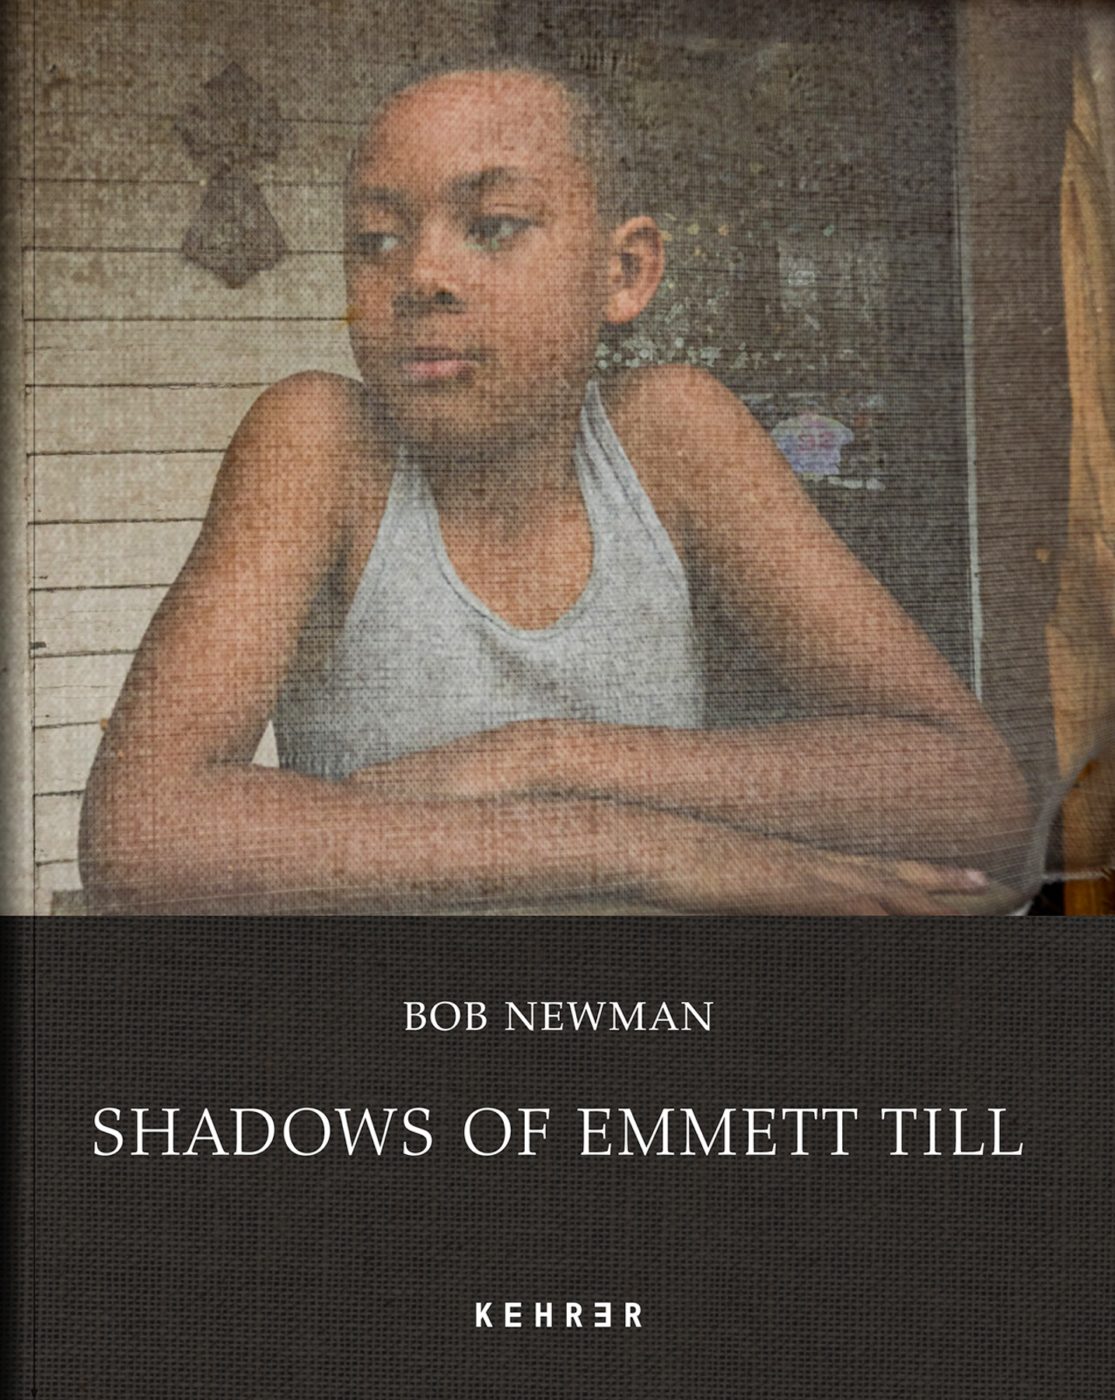 Cover of a book featuring an image of Emmett Till and the words 